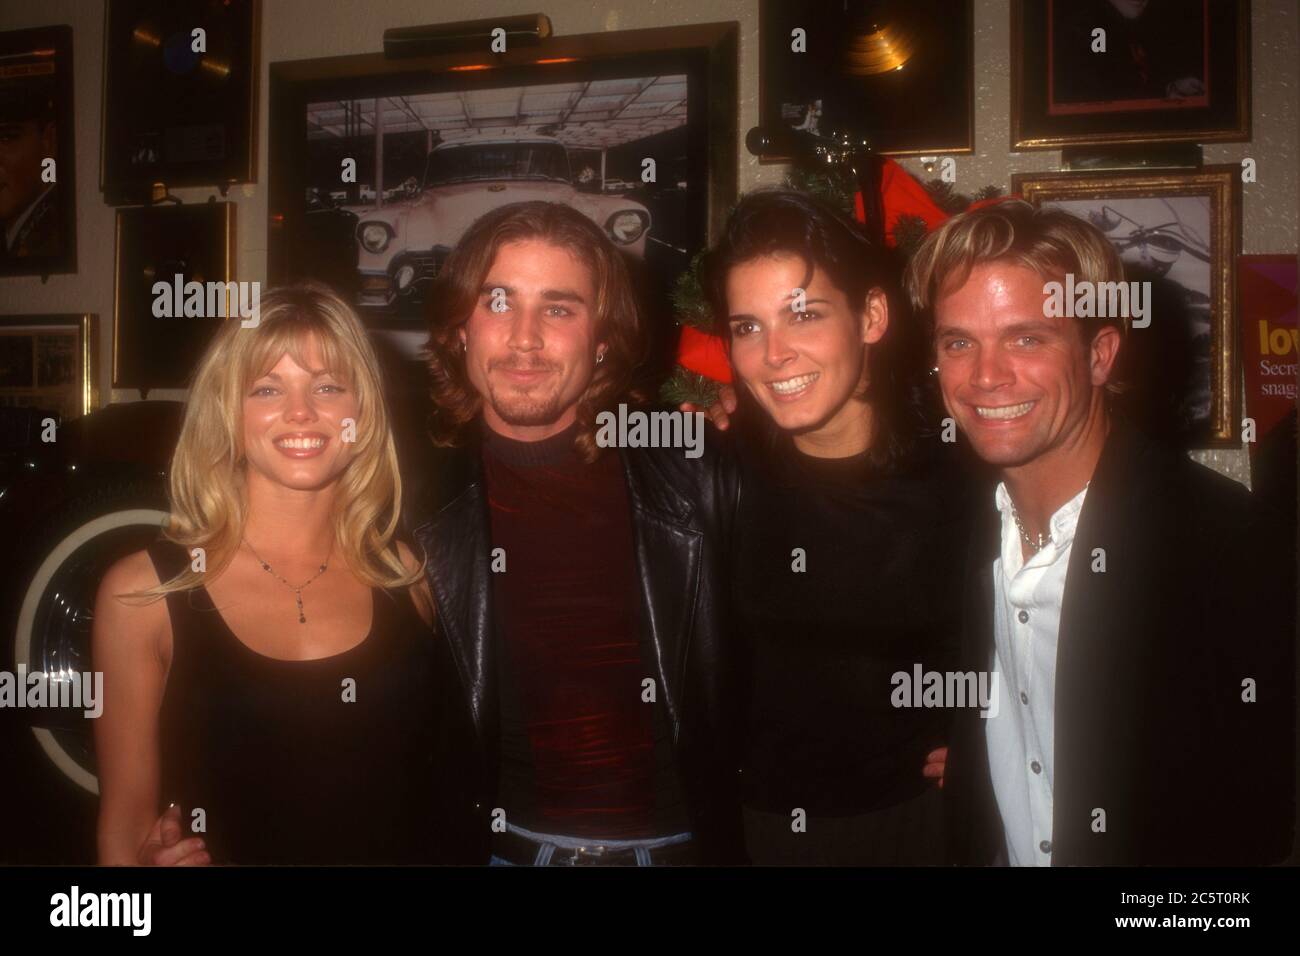 Los Angeles, California, USA 4th December 1995 (L-R) Actress Donna D'Errico, actor Jaason Simmons, actress Angie Harmon and actor David Chokachi attend event at Hard Rock Cafe on December 4, 1995 in Los Angeles, California, USA. Photo by Barry King/Alamy Stock Photo Stock Photo